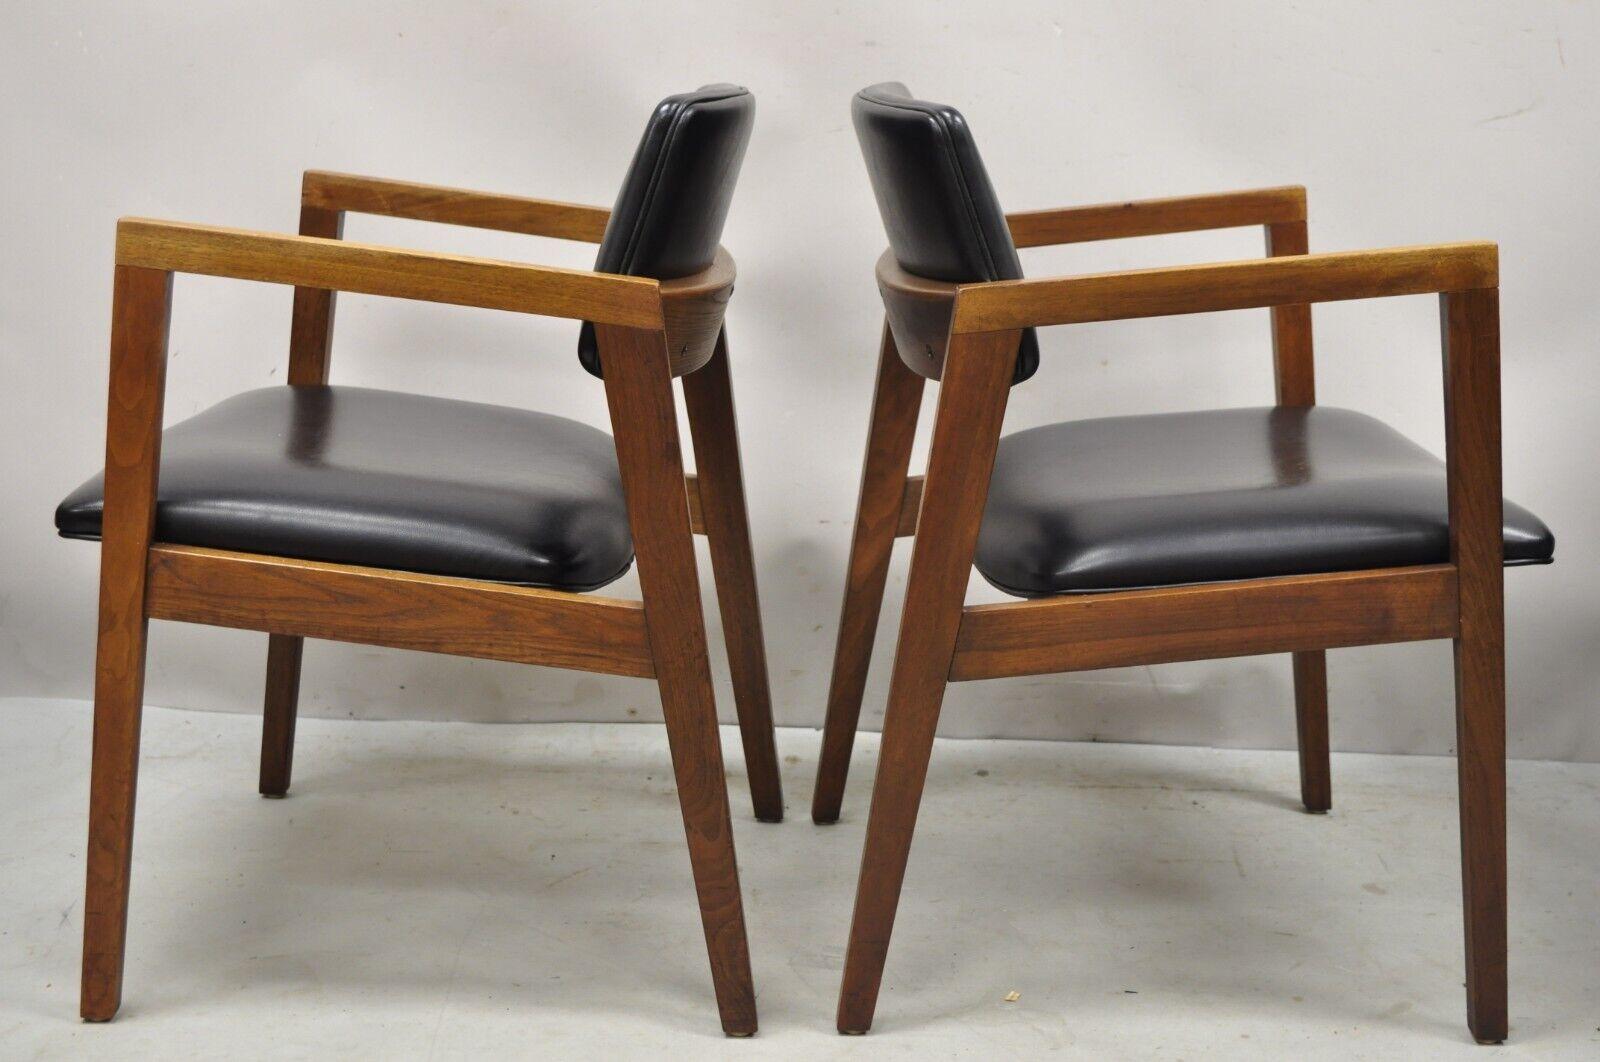 Pair Vintage Mid-Century Modern Walnut Arm Chair Lounge Chair by United Chair Co In Good Condition For Sale In Philadelphia, PA